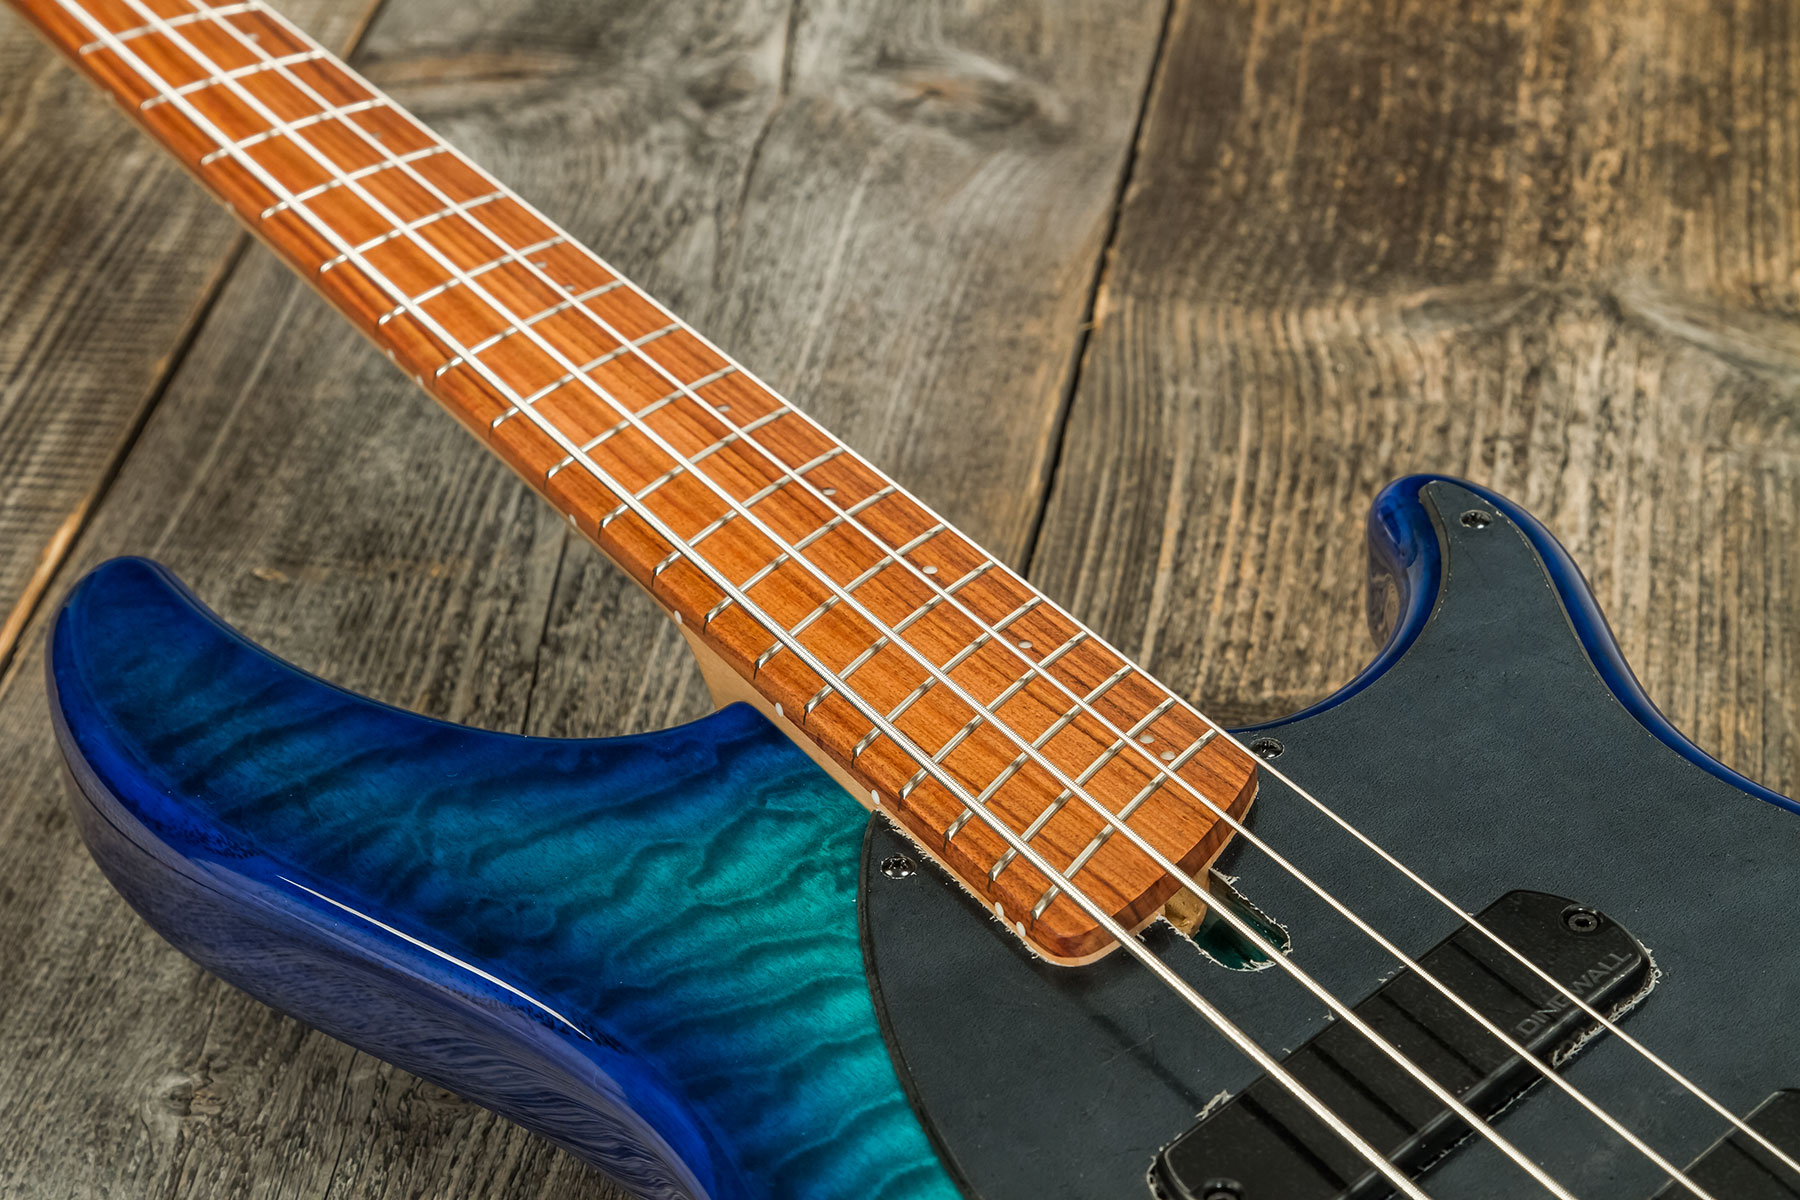 Dingwall Combustion Cb2 4c 2pu Active Pf - Whalepool Burst - Solid body electric bass - Variation 3